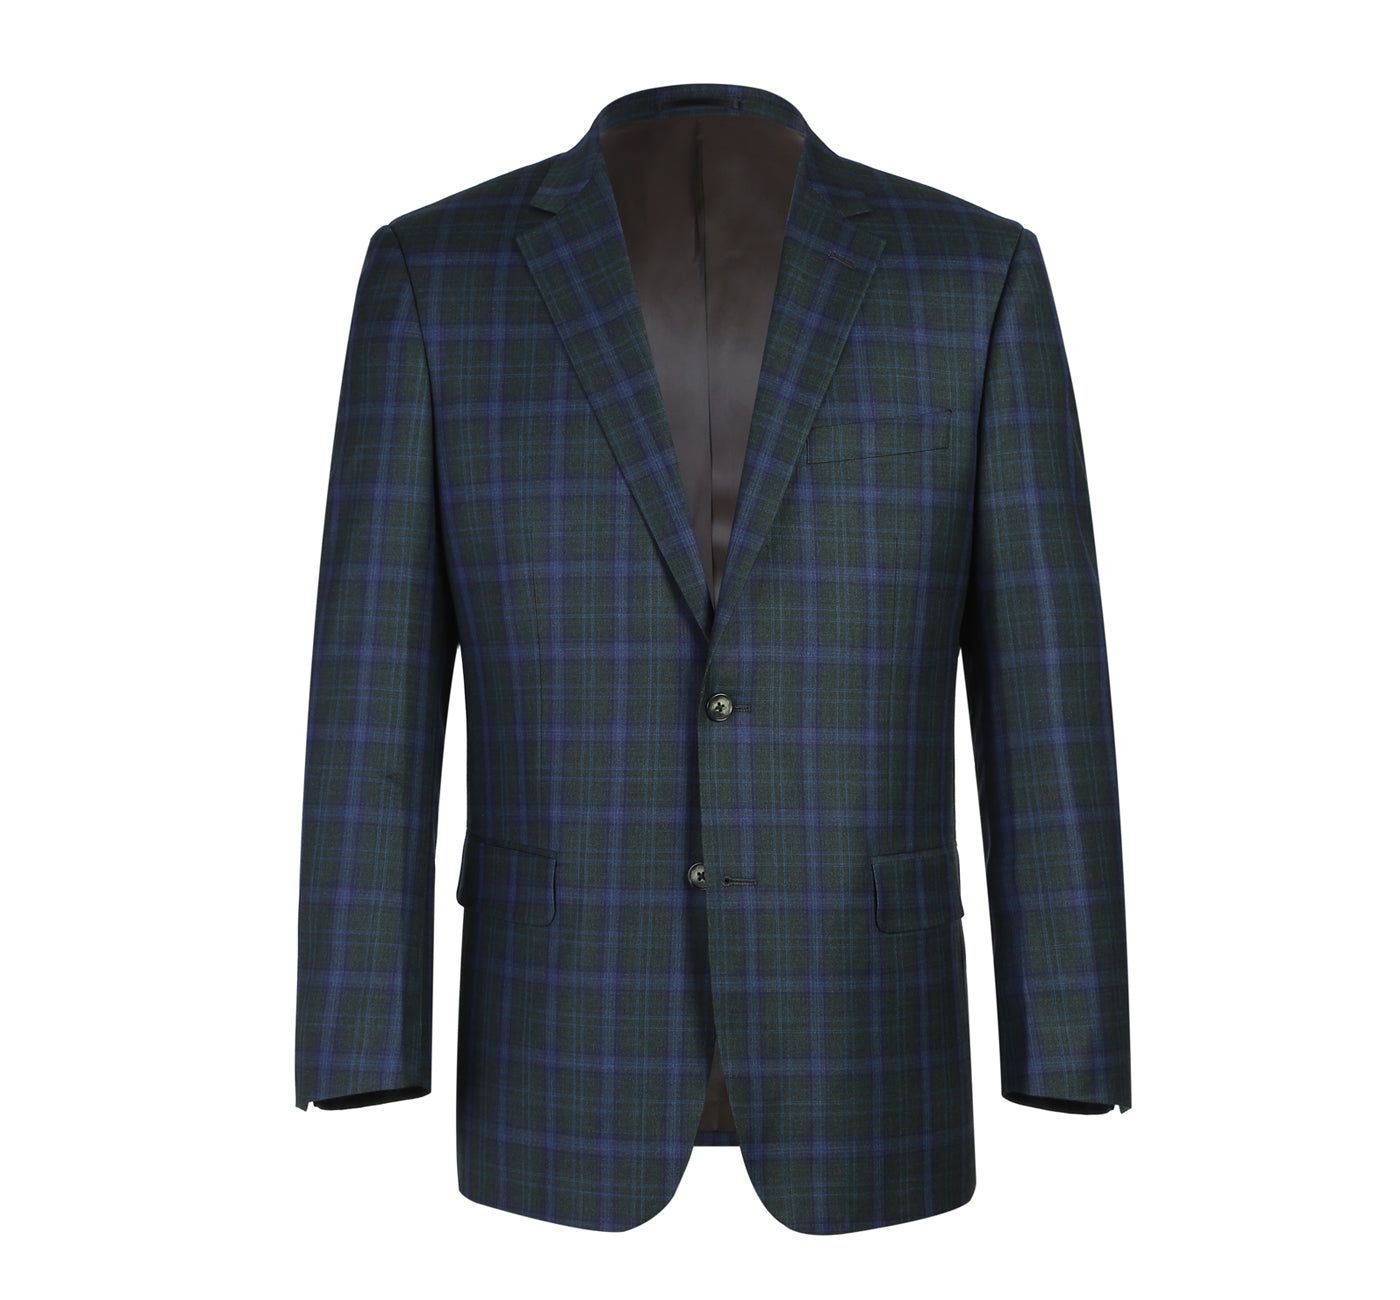 Men’s Classic Fit 100% Wool Charcoal Grey & Blue Check Jacket with Notch Lapel 2